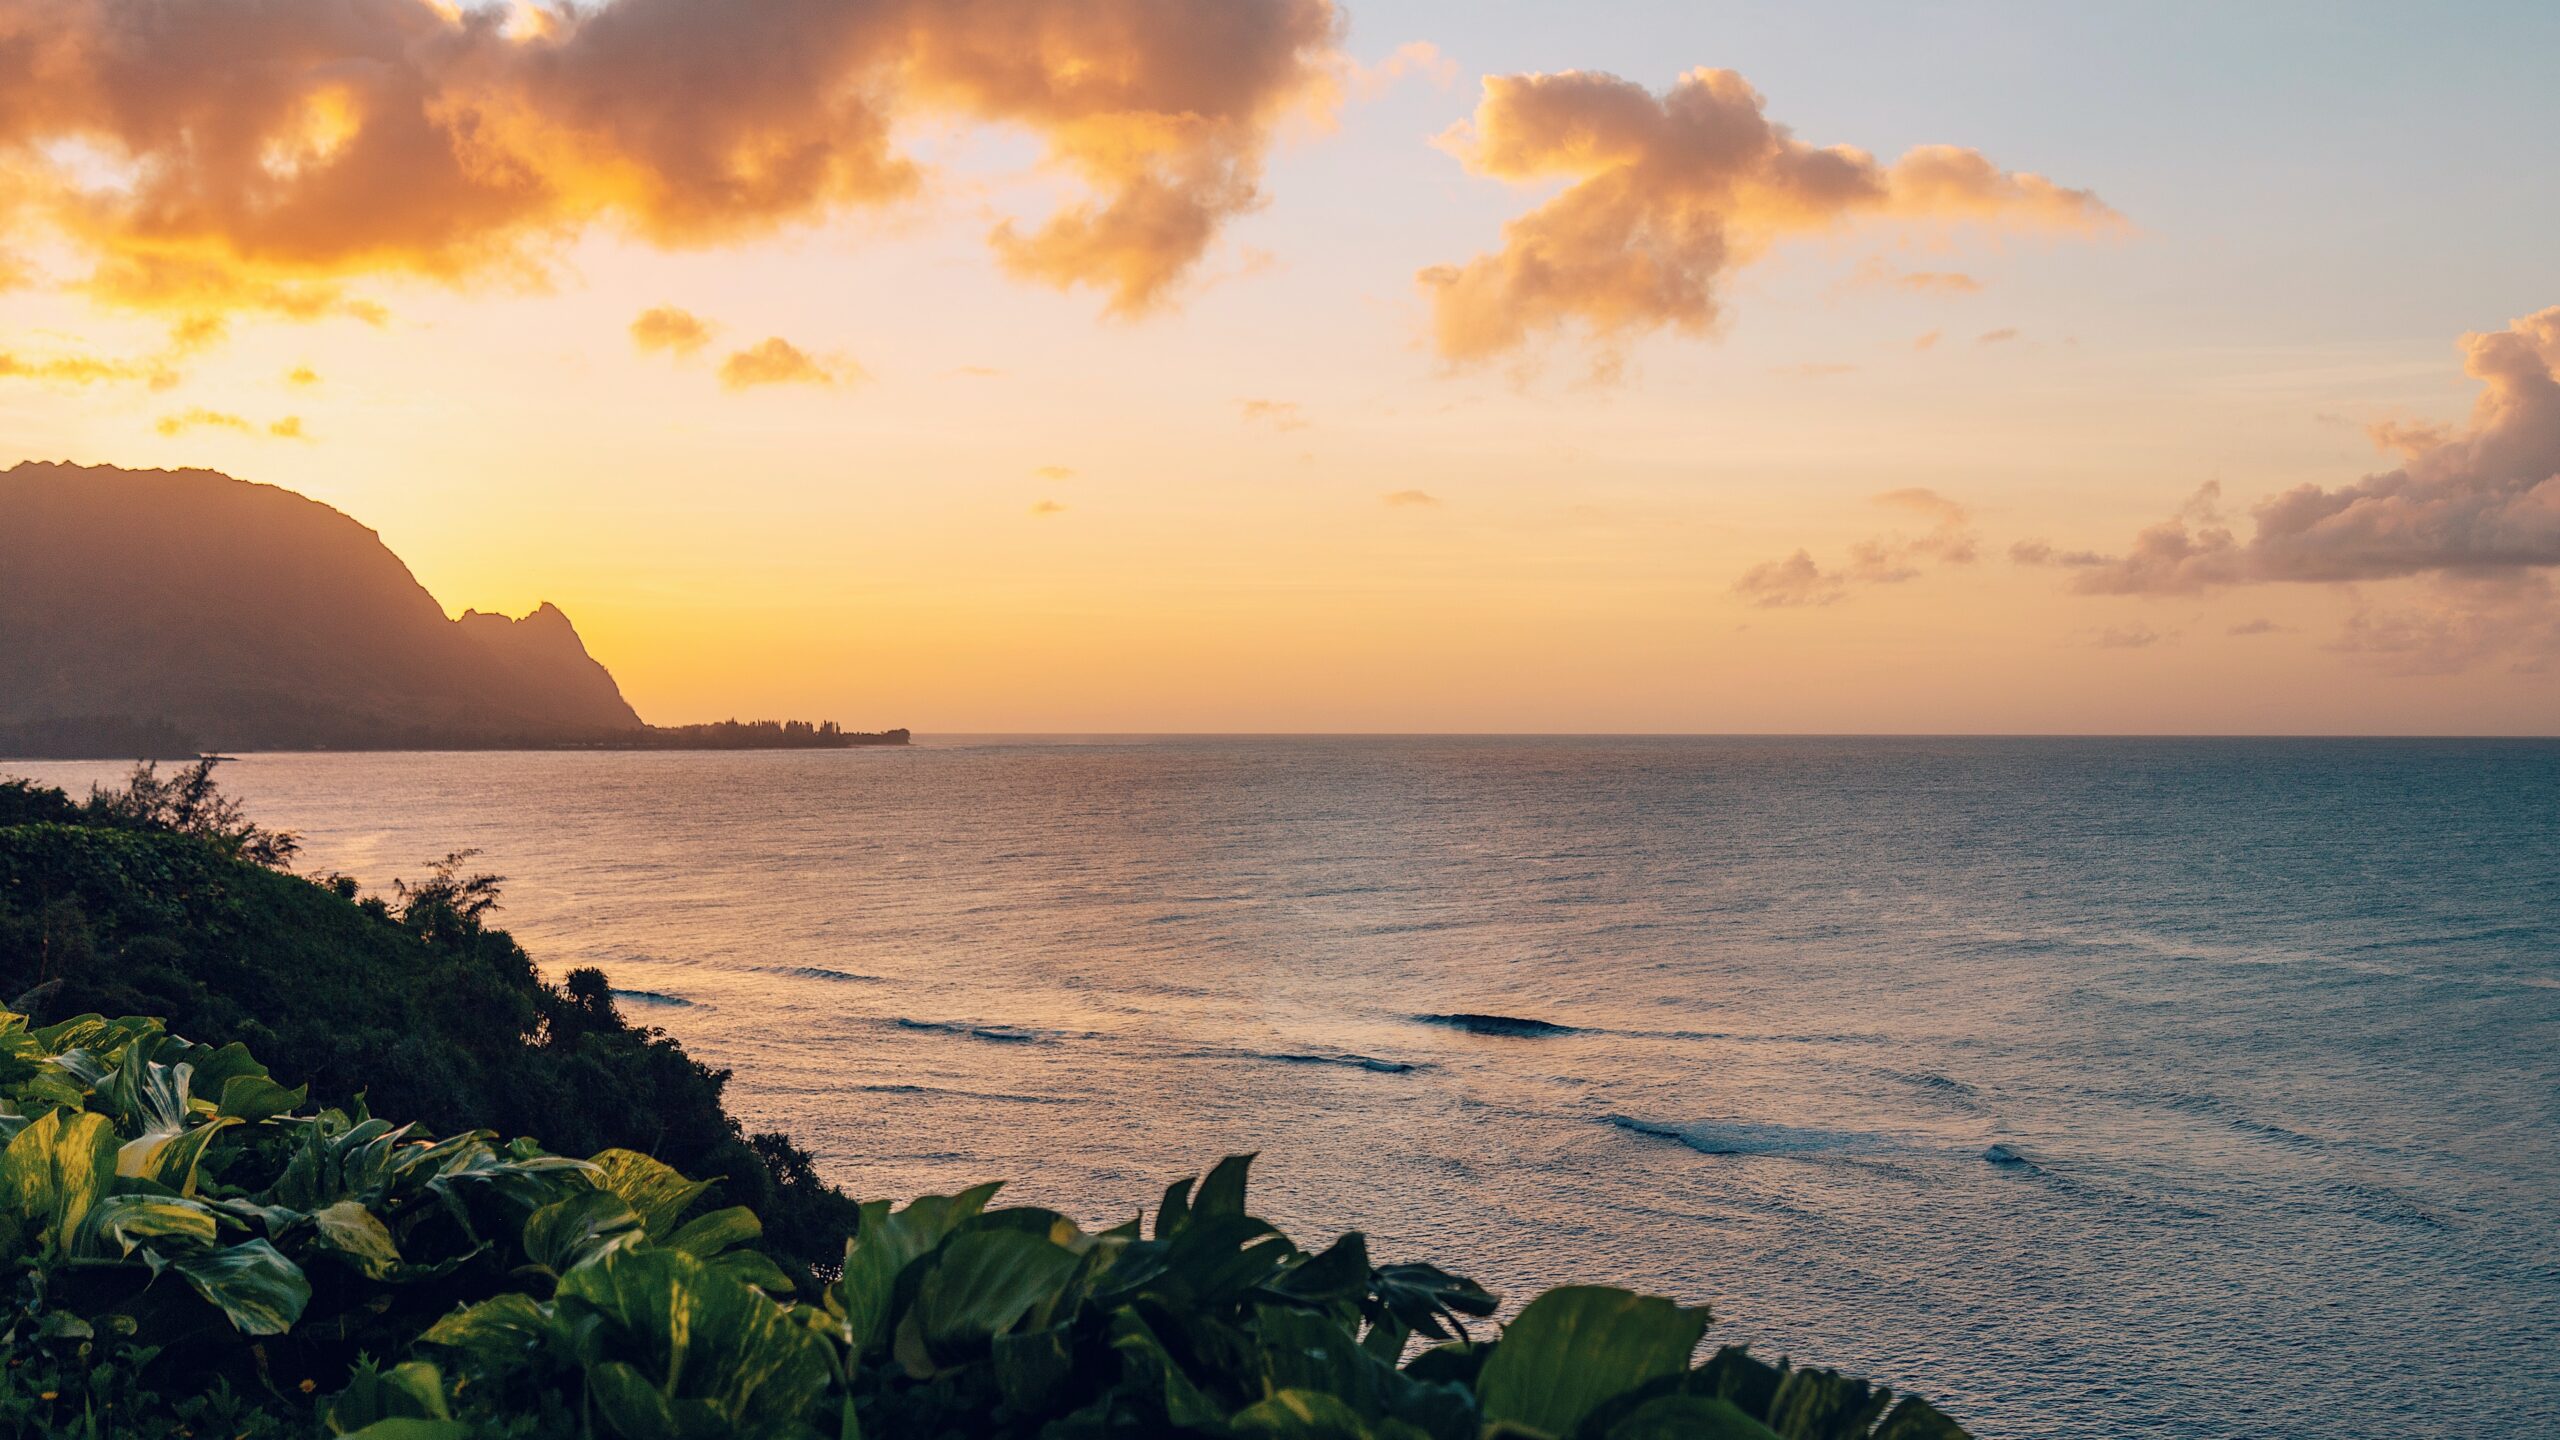 Check out the holiday offerings of the many Hawaiian islands. 
Pictured: the warm sunset off the coast of Kauai 